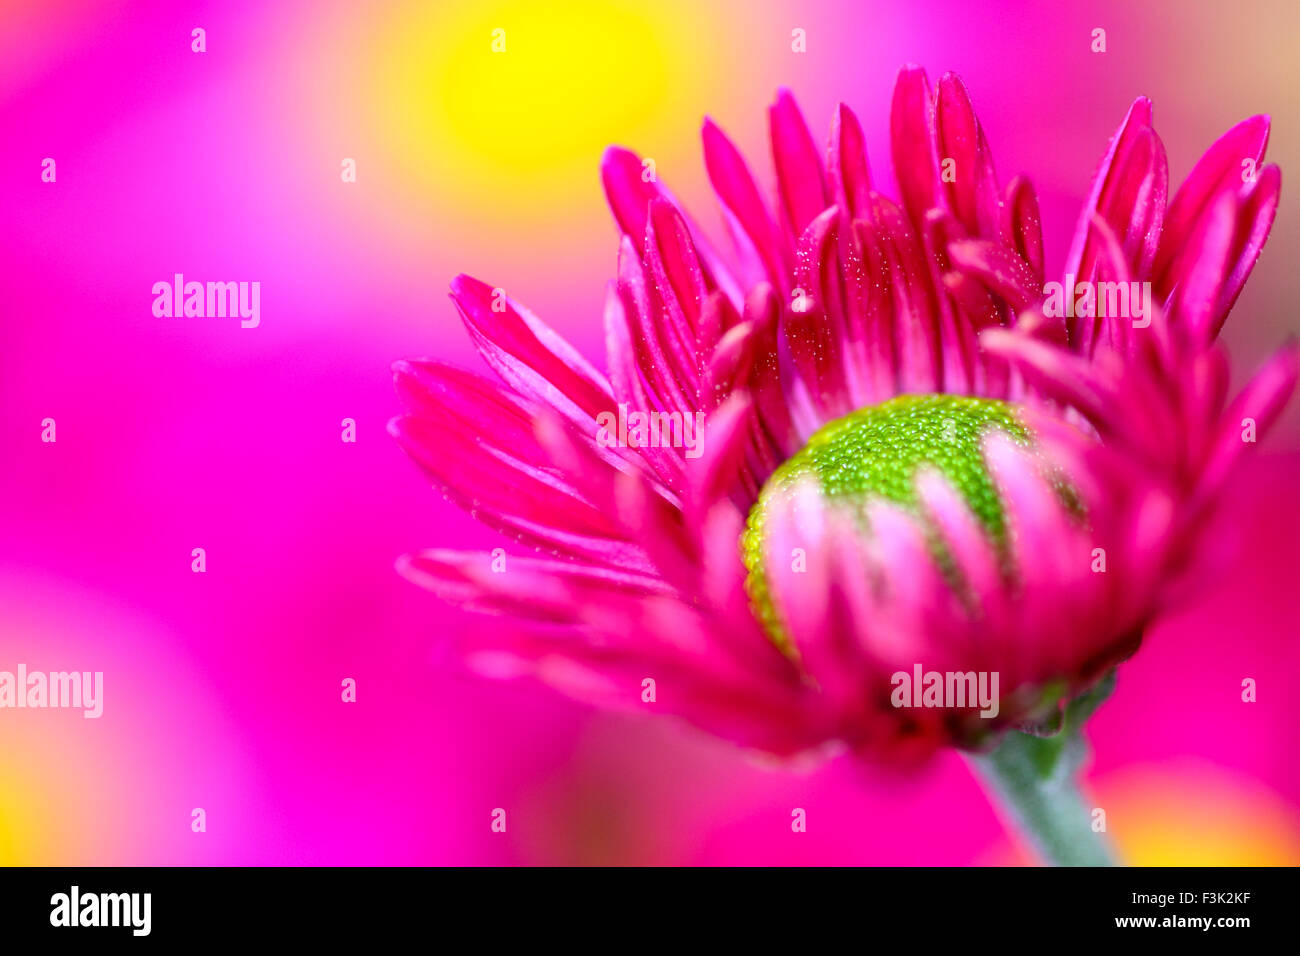 Leeds, UK. 08th Oct, 2015. After a week of wet weather the sun finally shone today highlighting the beautiful autumnal colours at Golden Acre park near Leeds, West Yorkshire.The large display of chrysanthemum flowers looked particularly vibrant. Taken on the 8th October 2015. Credit:  Andrew Gardner/Alamy Live News Stock Photo